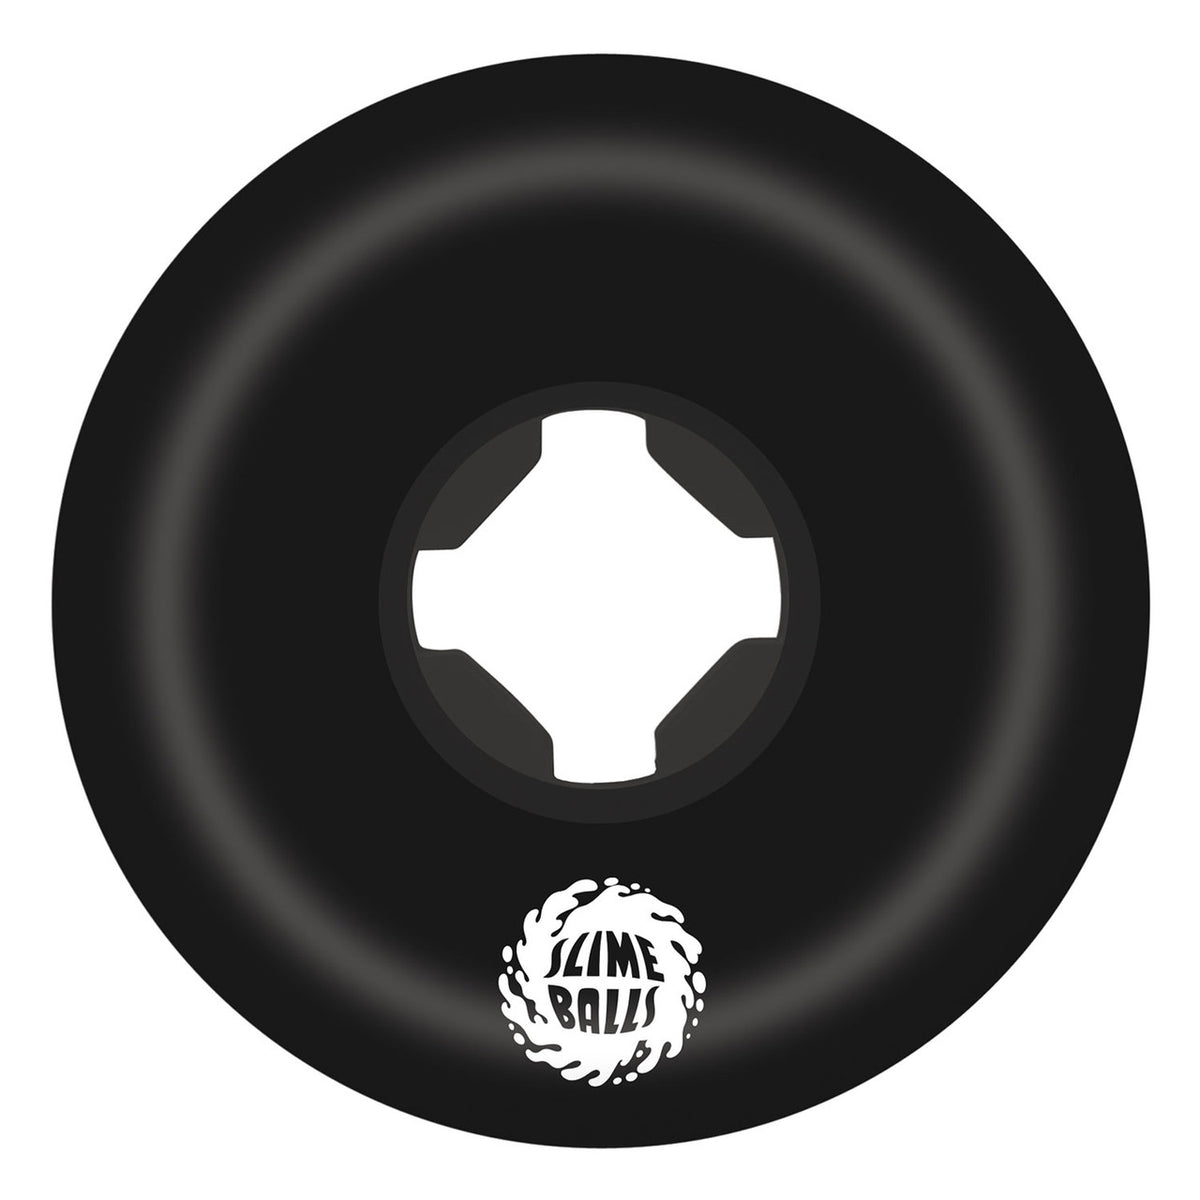 Slime Balls Mike Giant Speed Balls 78A Black 54mm